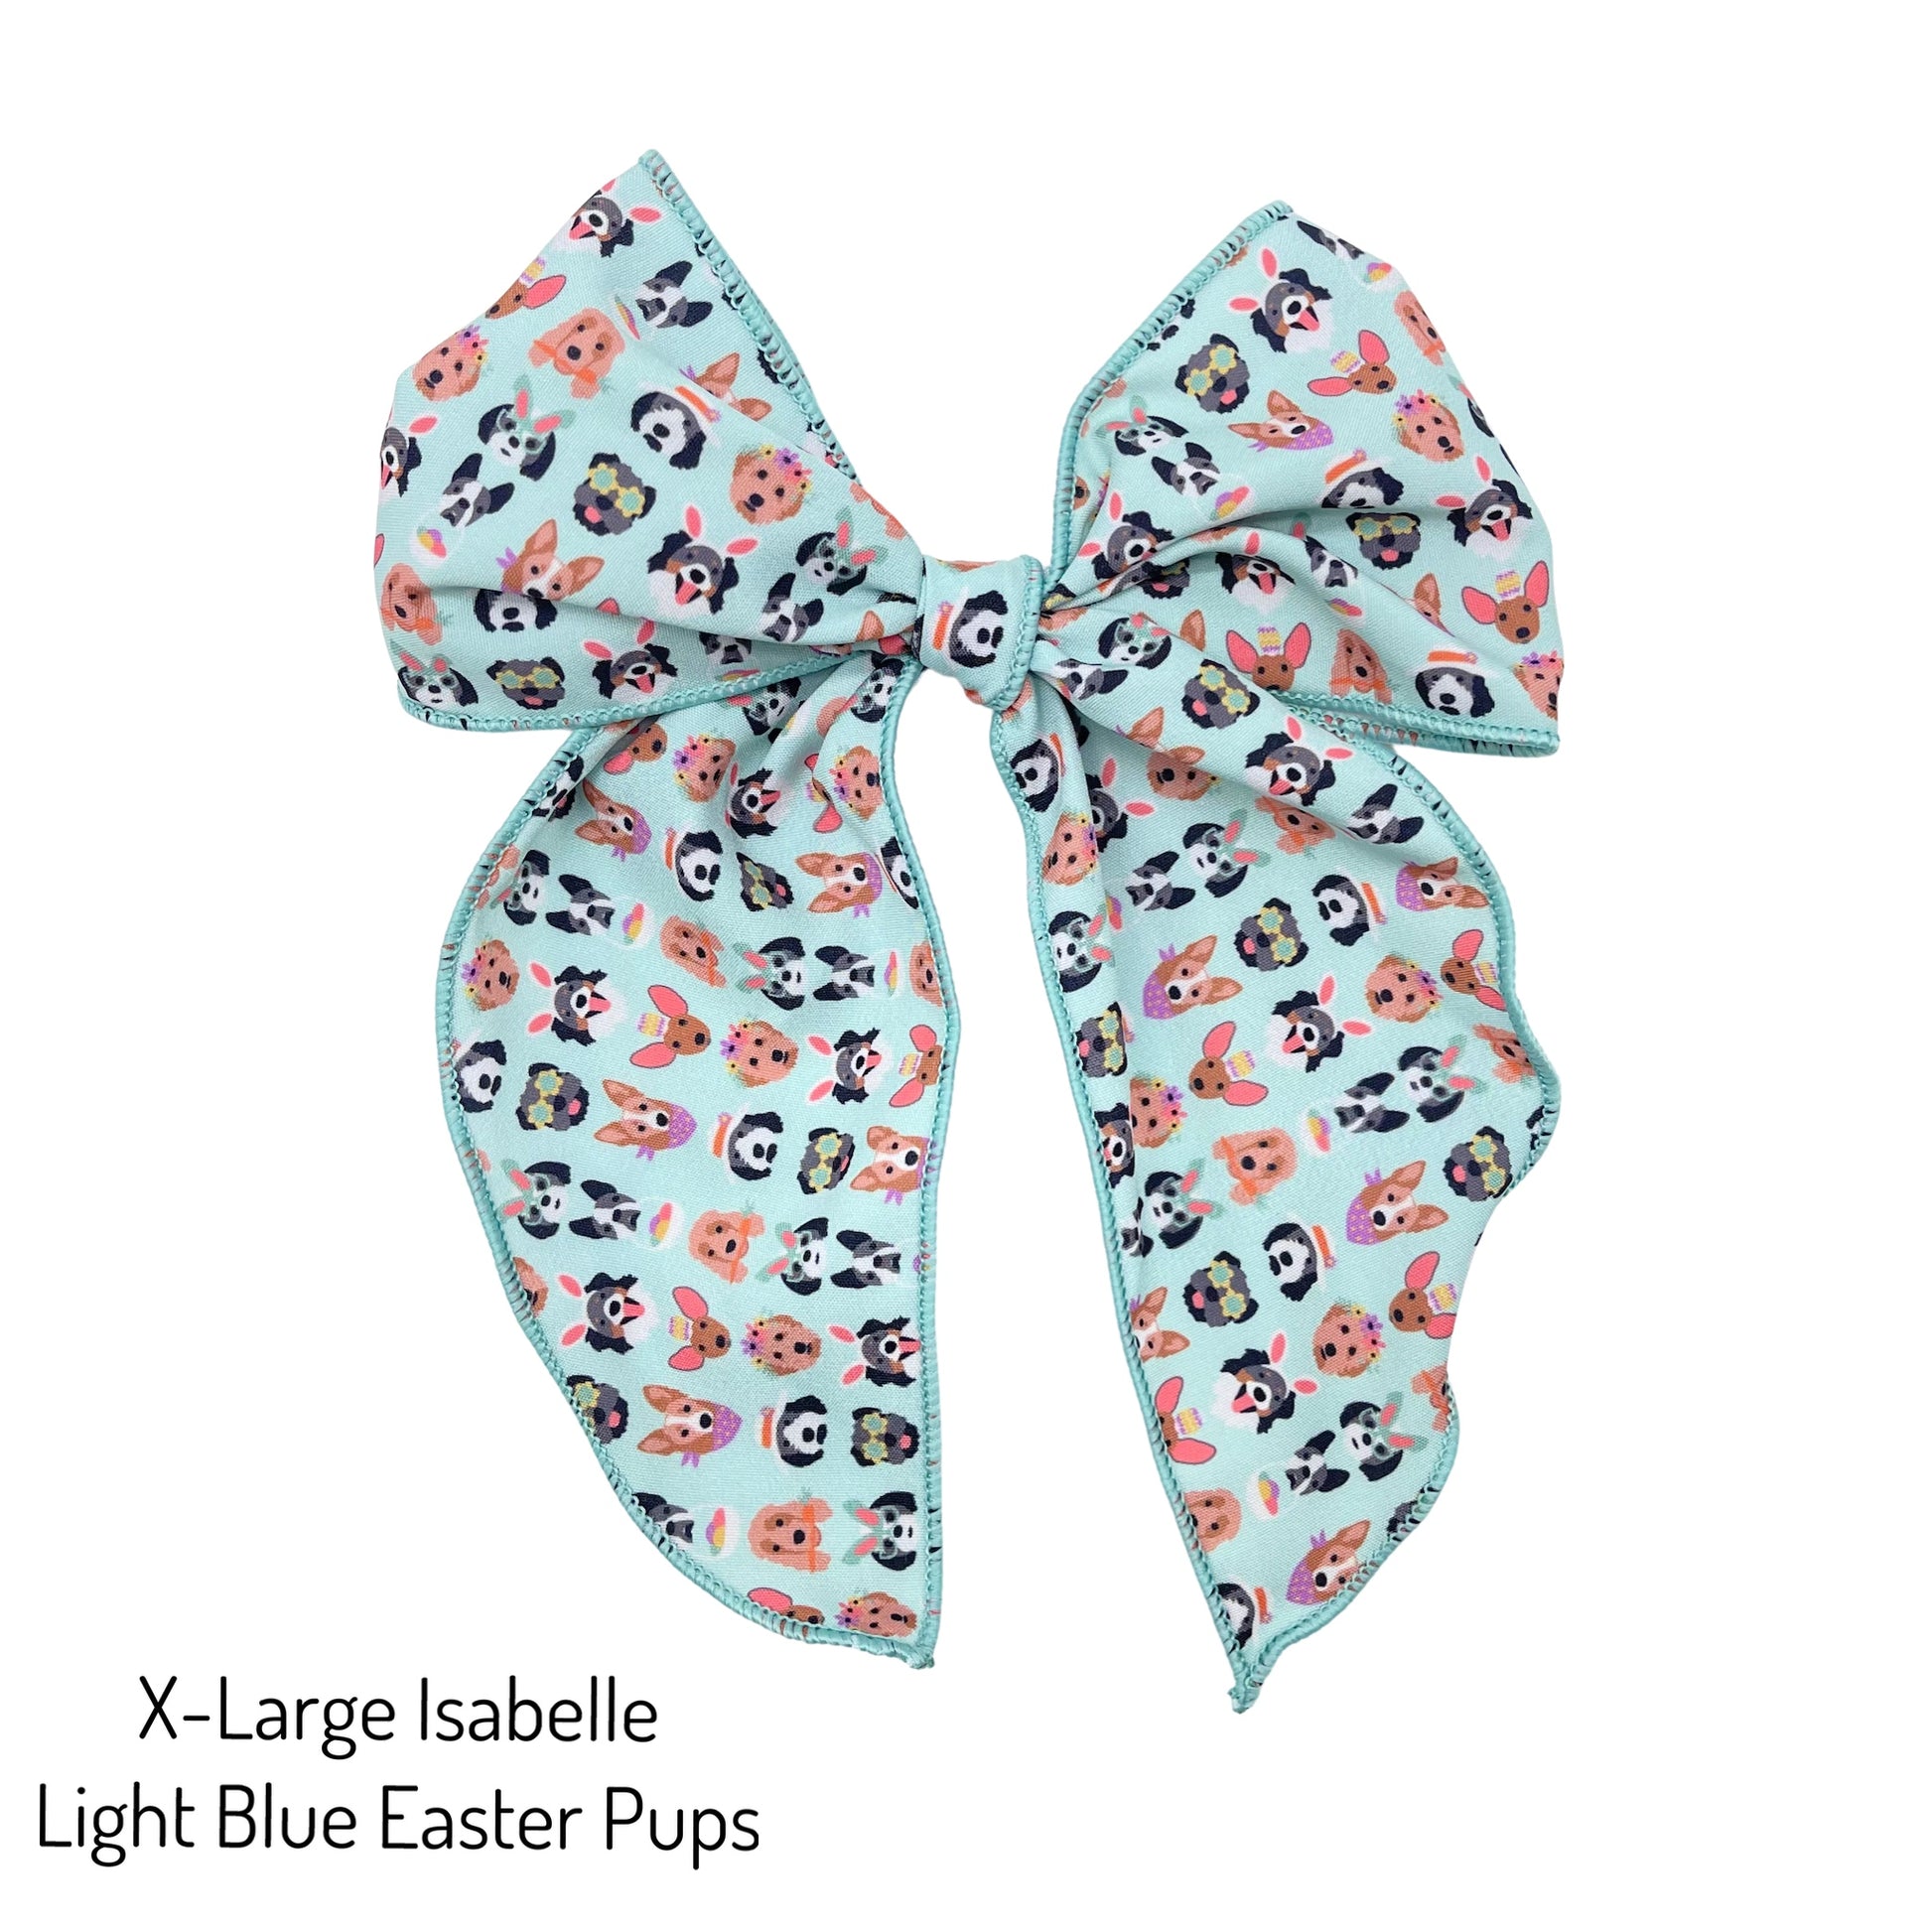 Tied and untied light aqua blue extra large Isabelle style bow strip with Easter dogs pattern designed by Hey Cute Design.